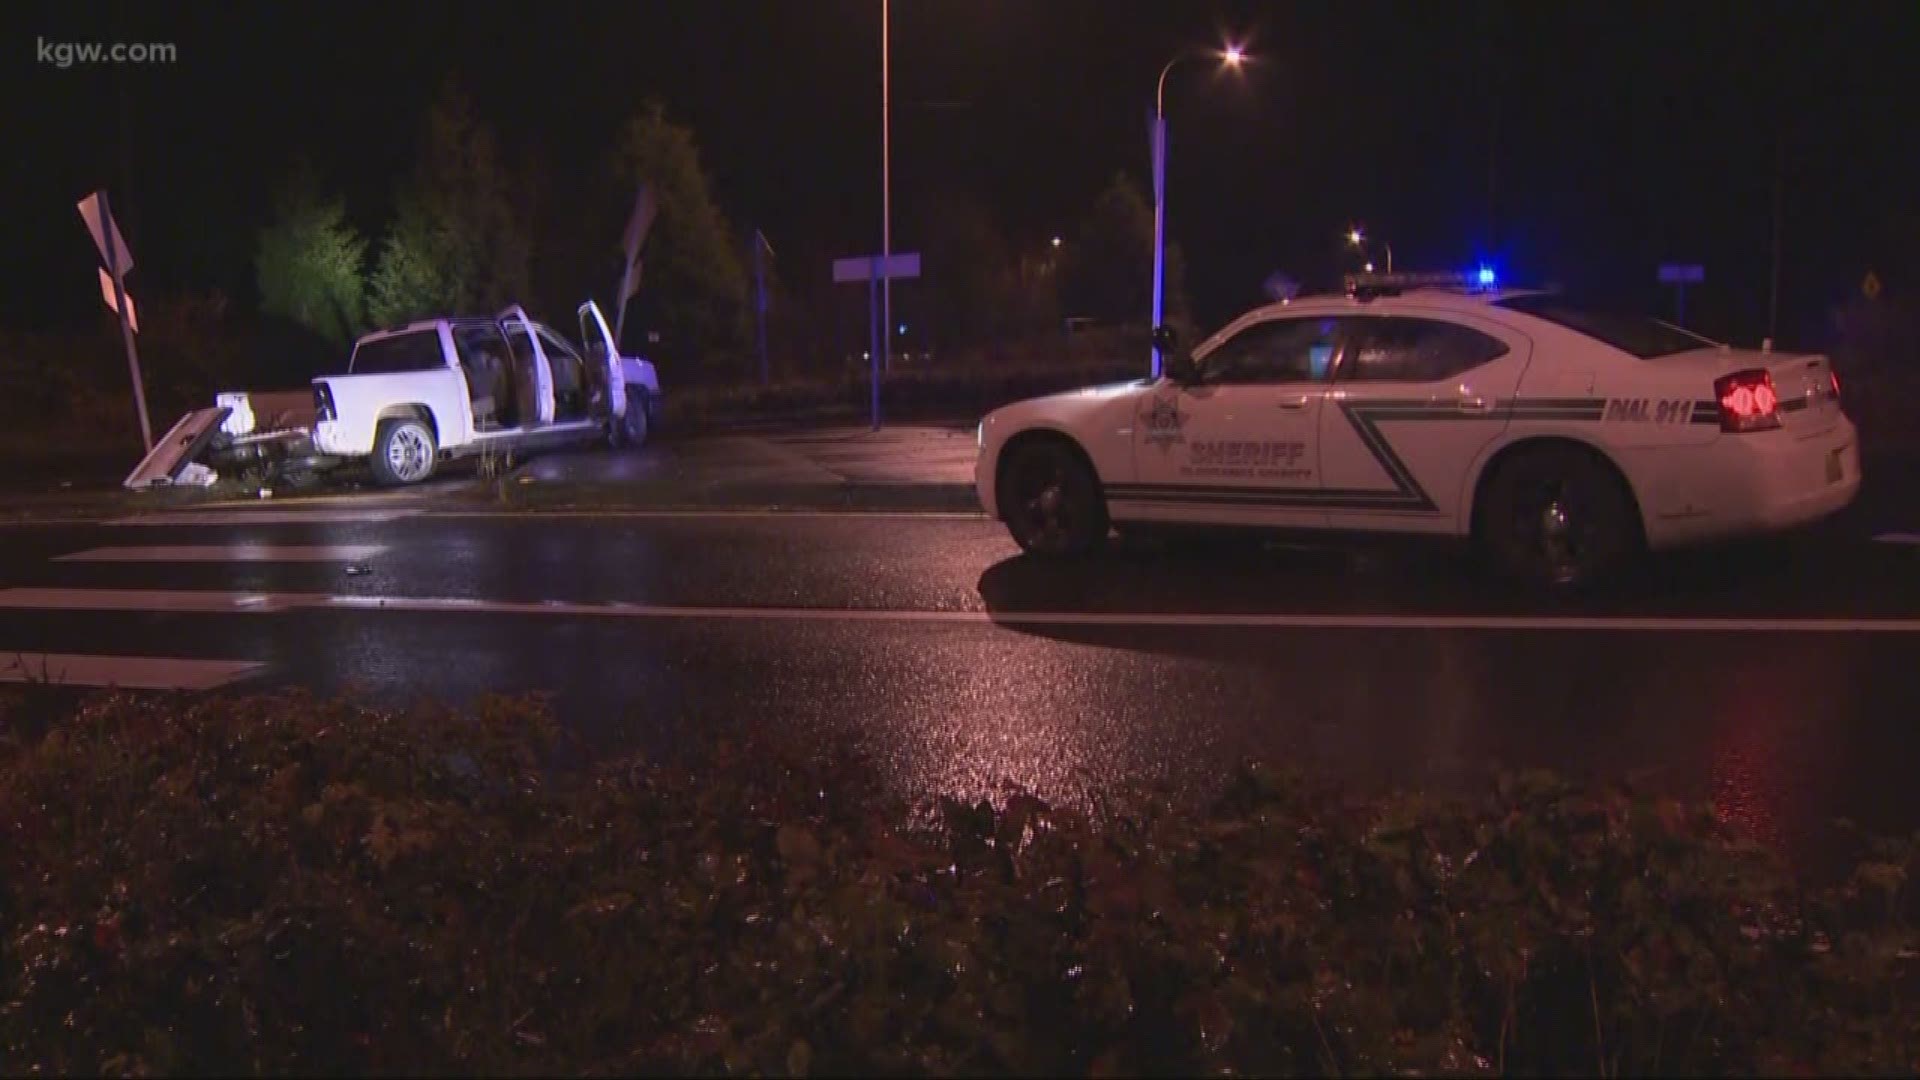 Four people detained after Clackamas Co. chase, crash